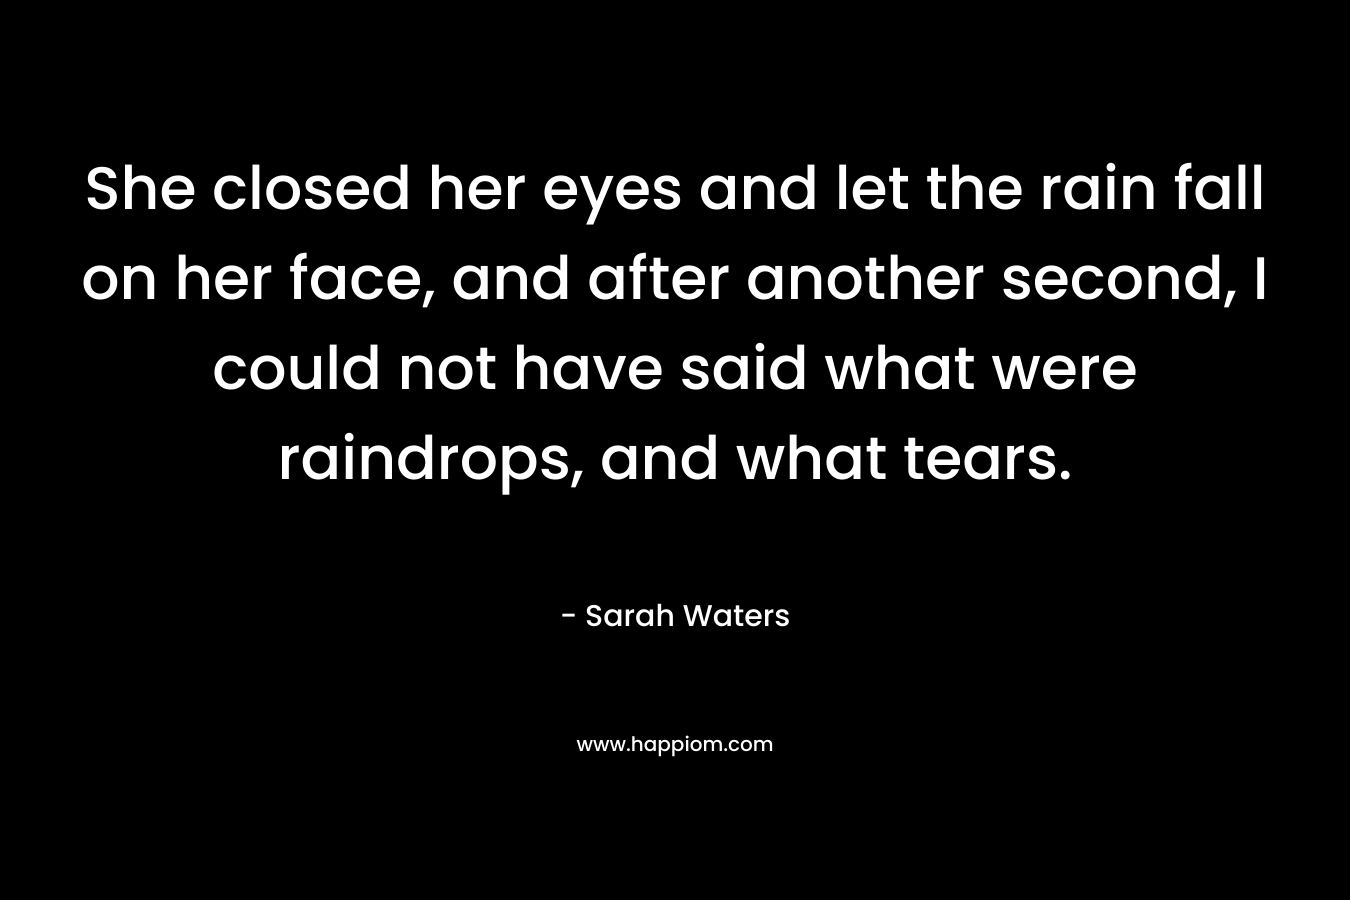 She closed her eyes and let the rain fall on her face, and after another second, I could not have said what were raindrops, and what tears. – Sarah Waters